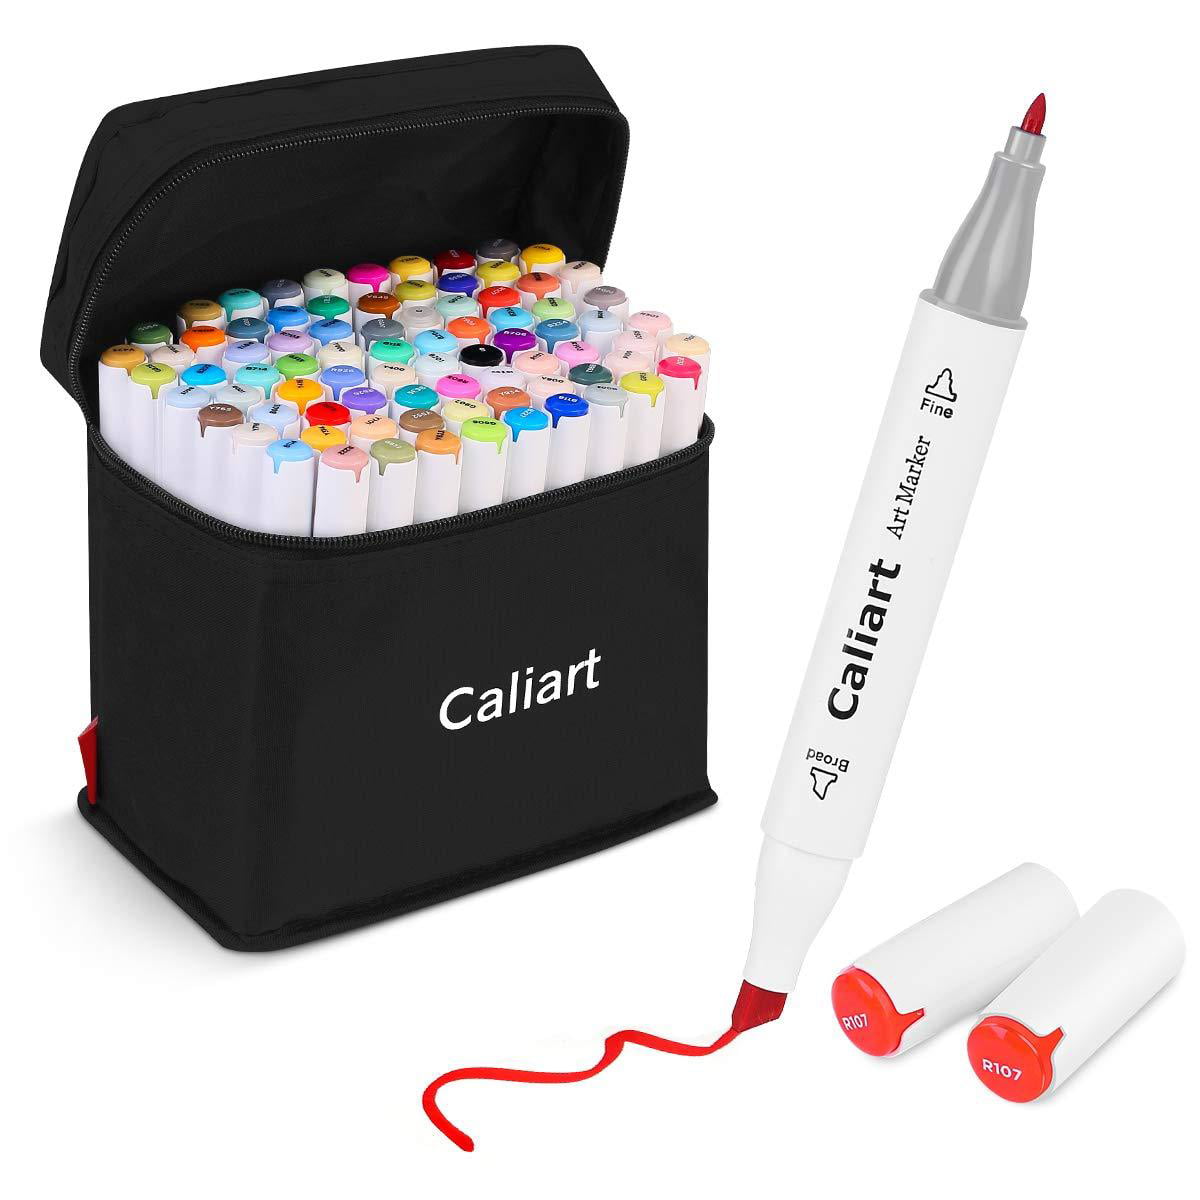 Caliart 80 Colors Dual Tip Permanent Art Markers Alcohol Based Sketch